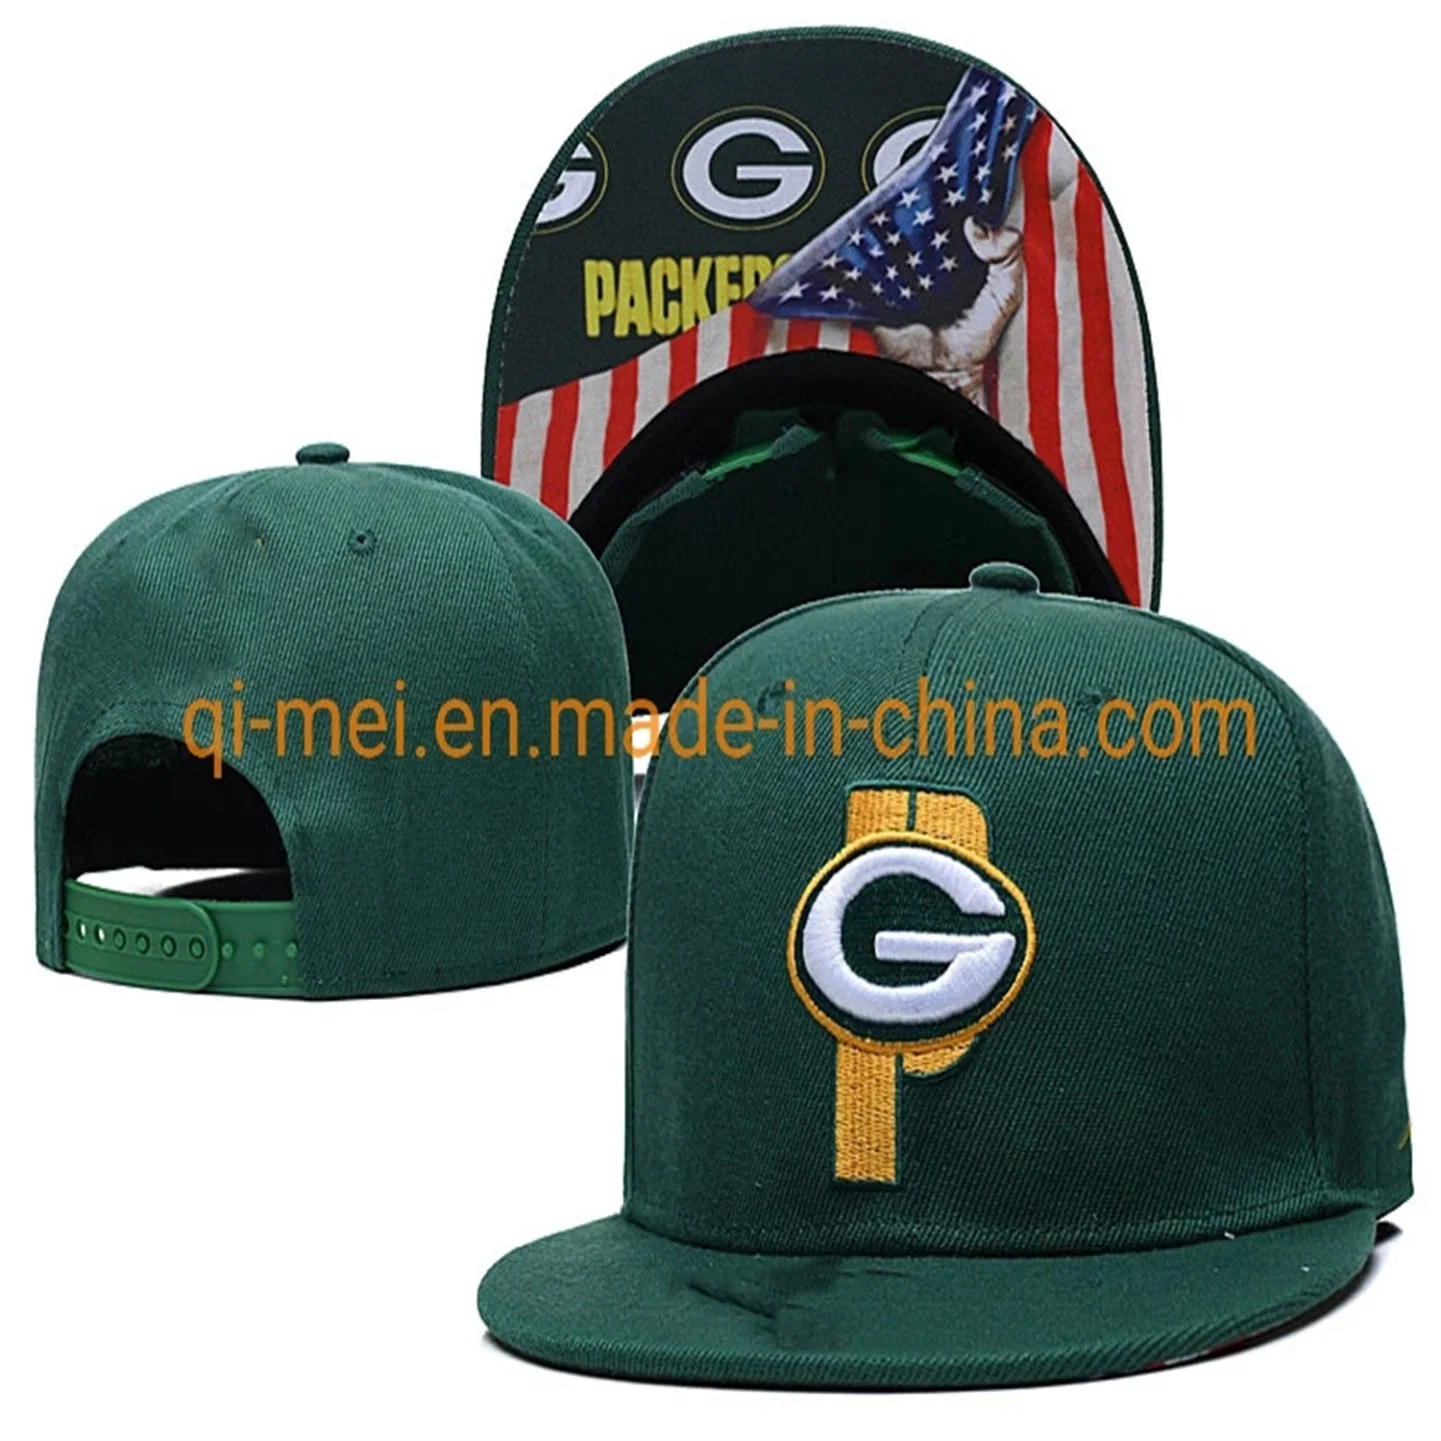 Cheap Men's Packers Green Bay Training Camp Official Snapback Adjustable Hat